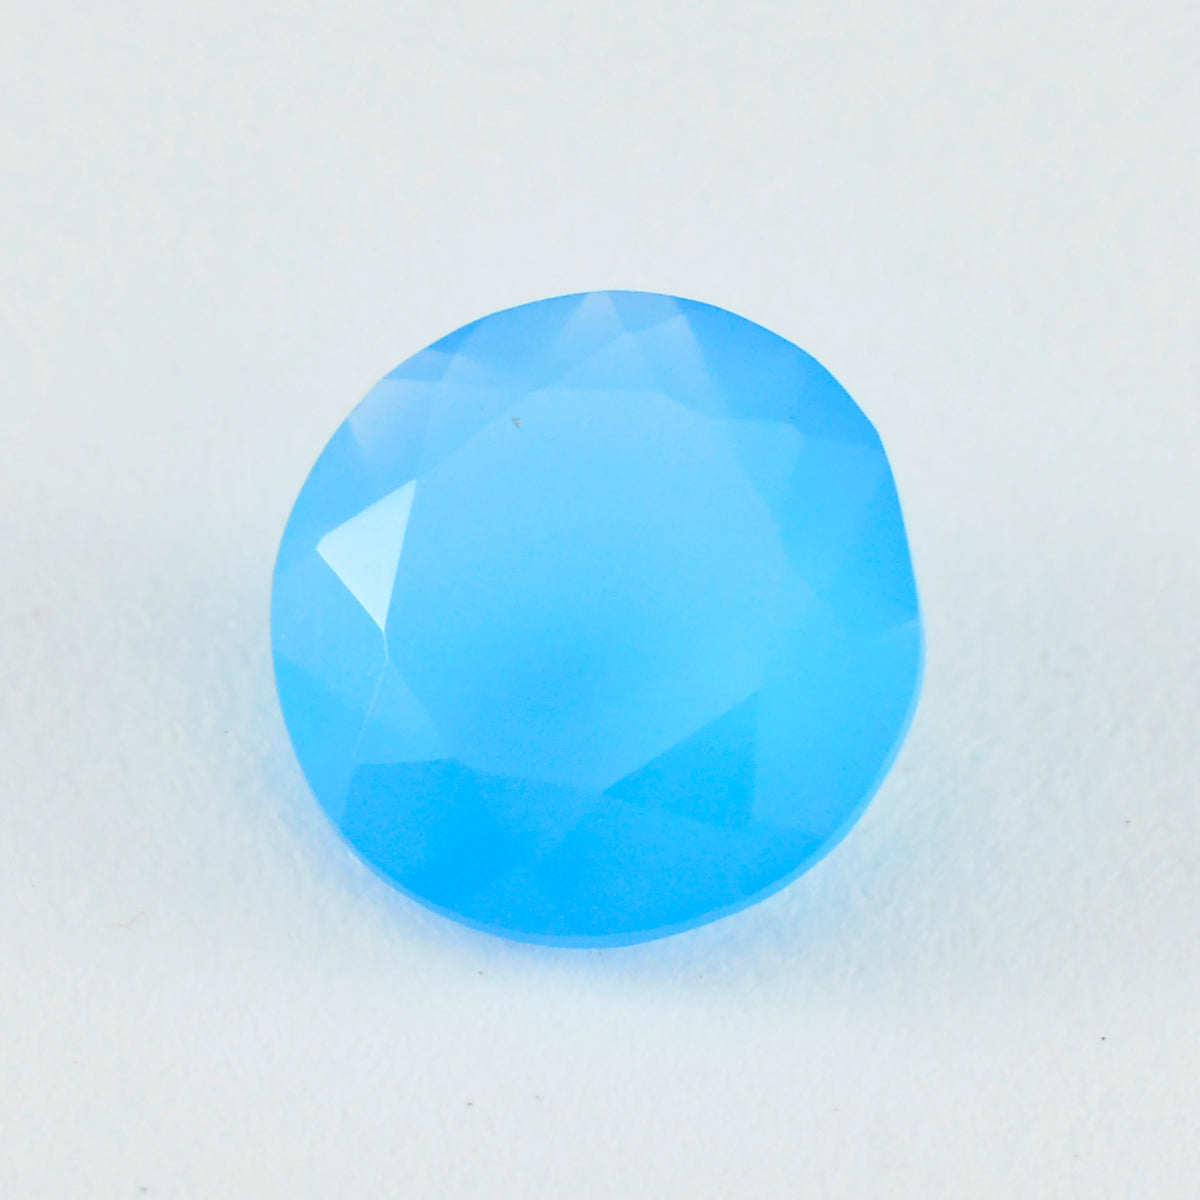 Riyogems 1PC Real Blue Chalcedony Faceted 13x13 mm Round Shape A Quality Gem